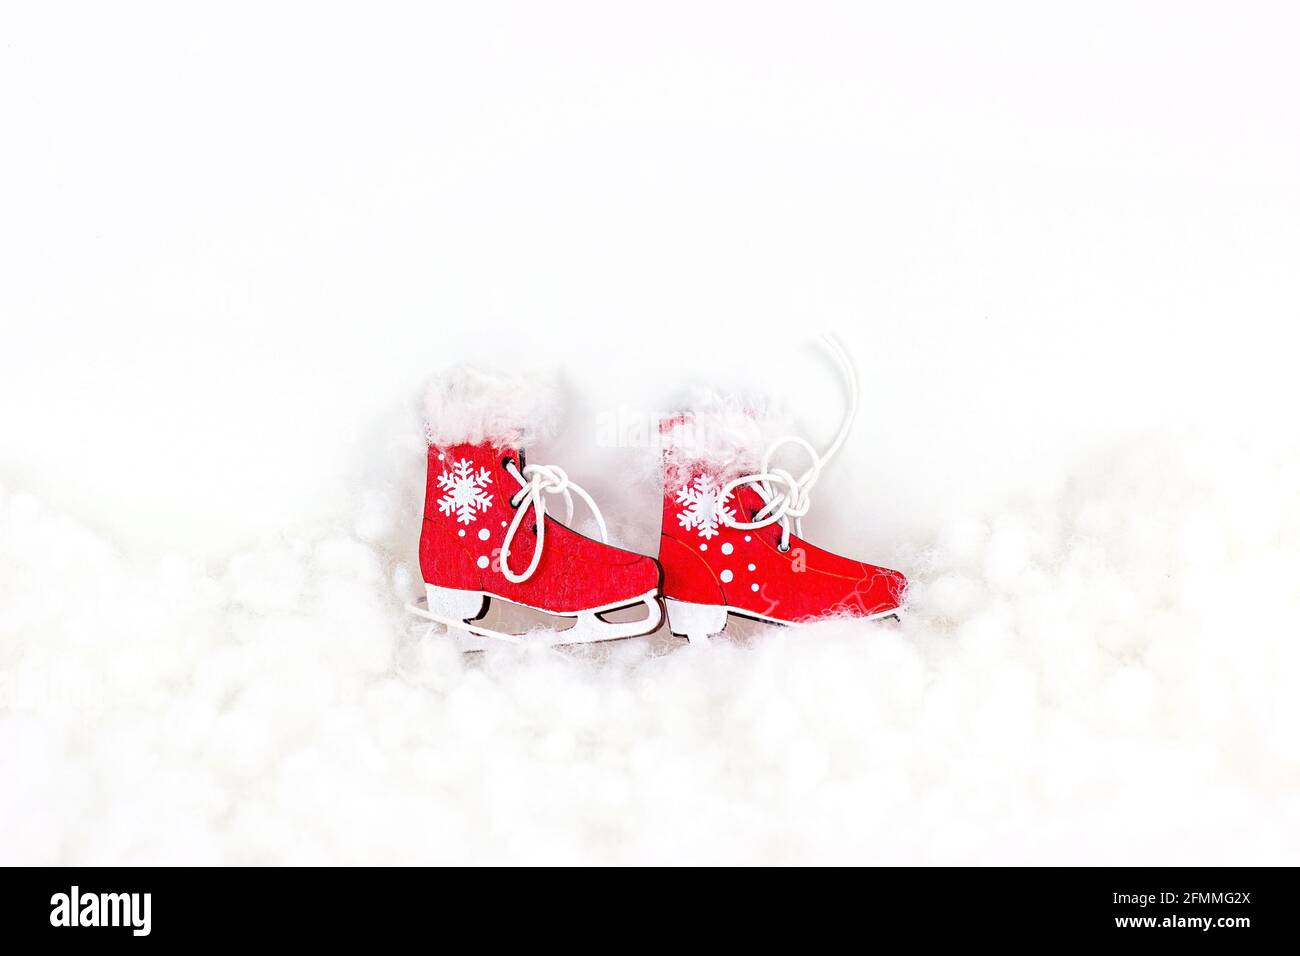 Bright red vintage toy skating shoes on white artificial snow background with copy space. Winter sports, Christmas and New Year holiday design concept Stock Photo